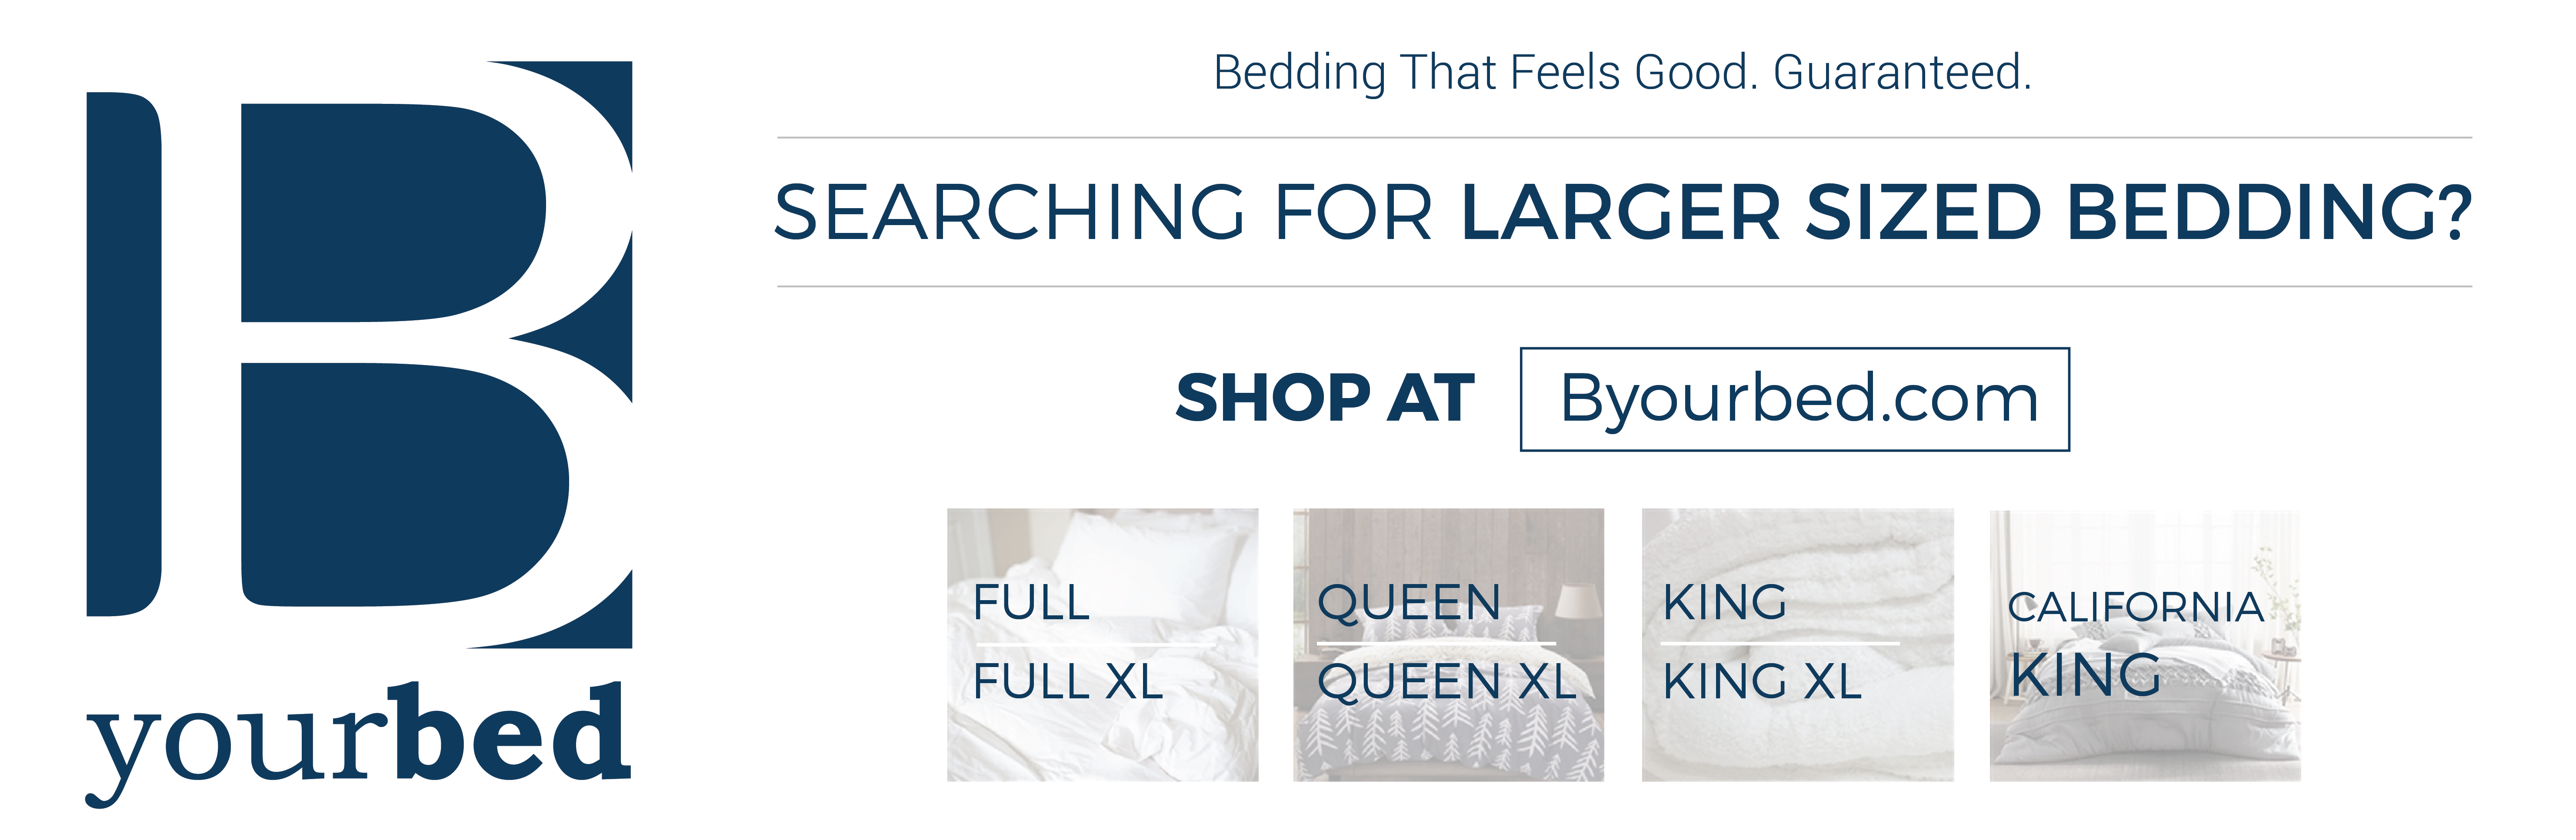 Full Queen And King Comforters And Other Essential Larger